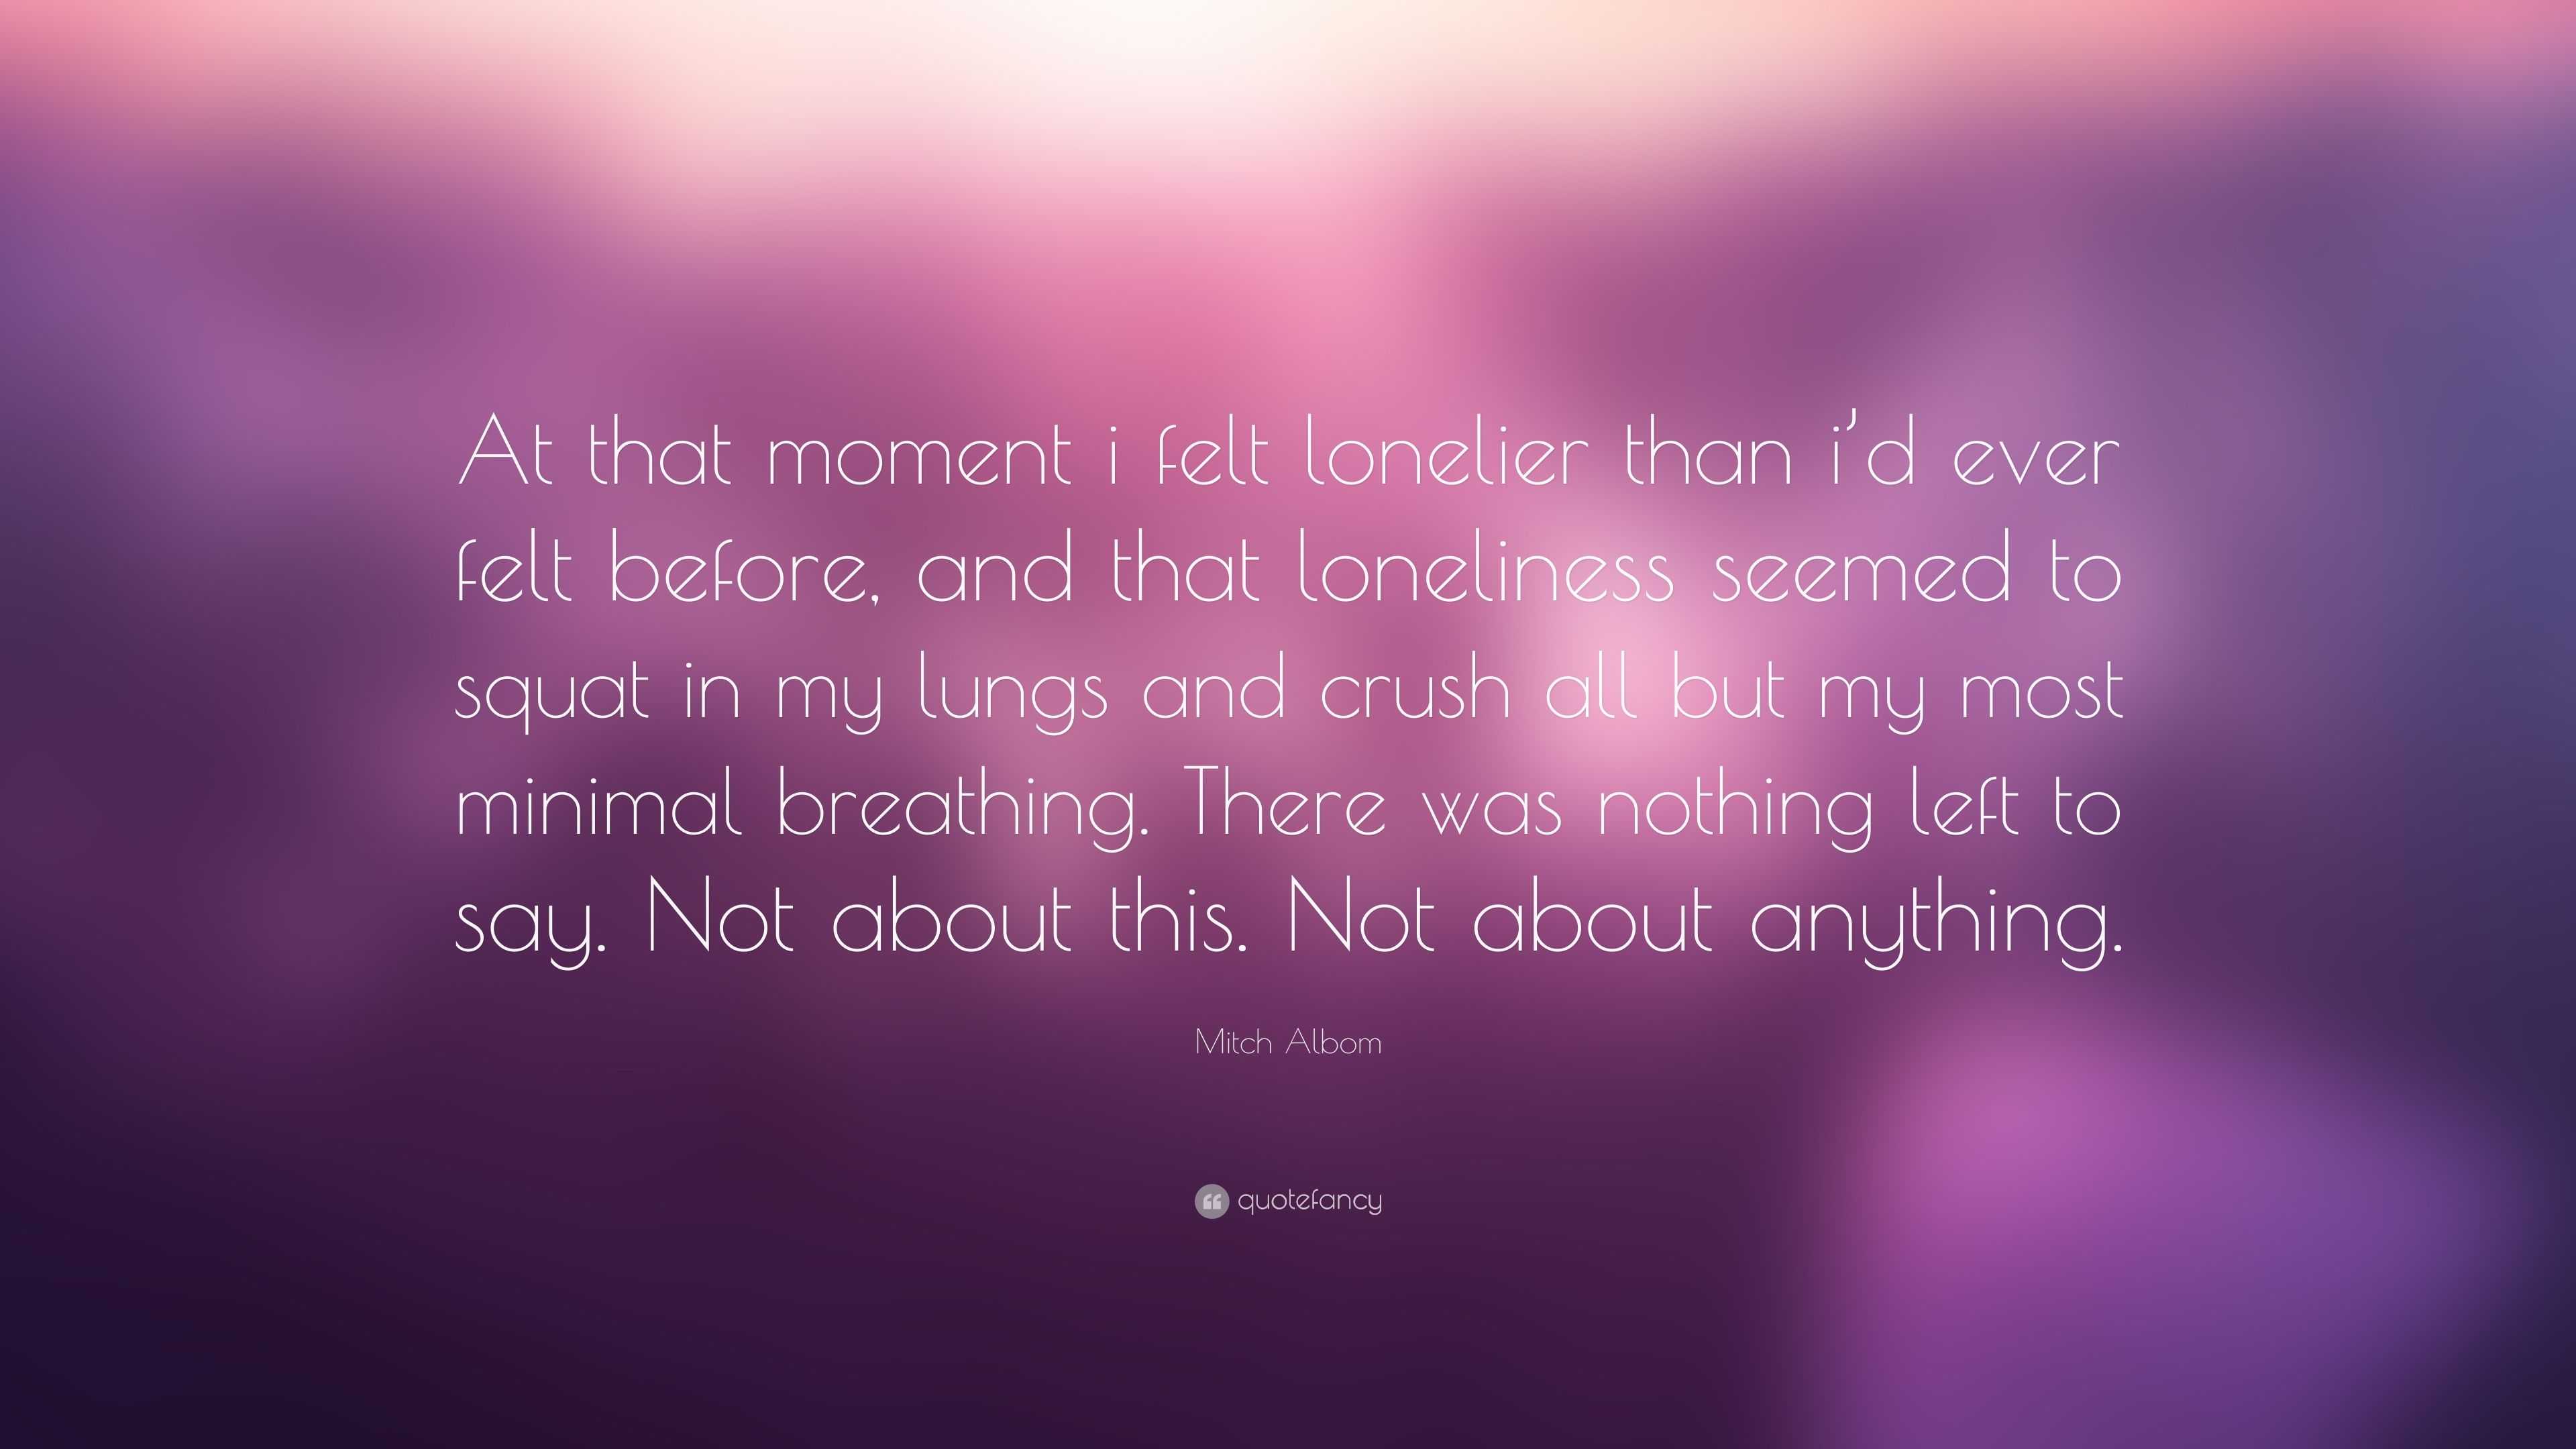 Mitch Albom Quote: "At that moment i felt lonelier than i ...